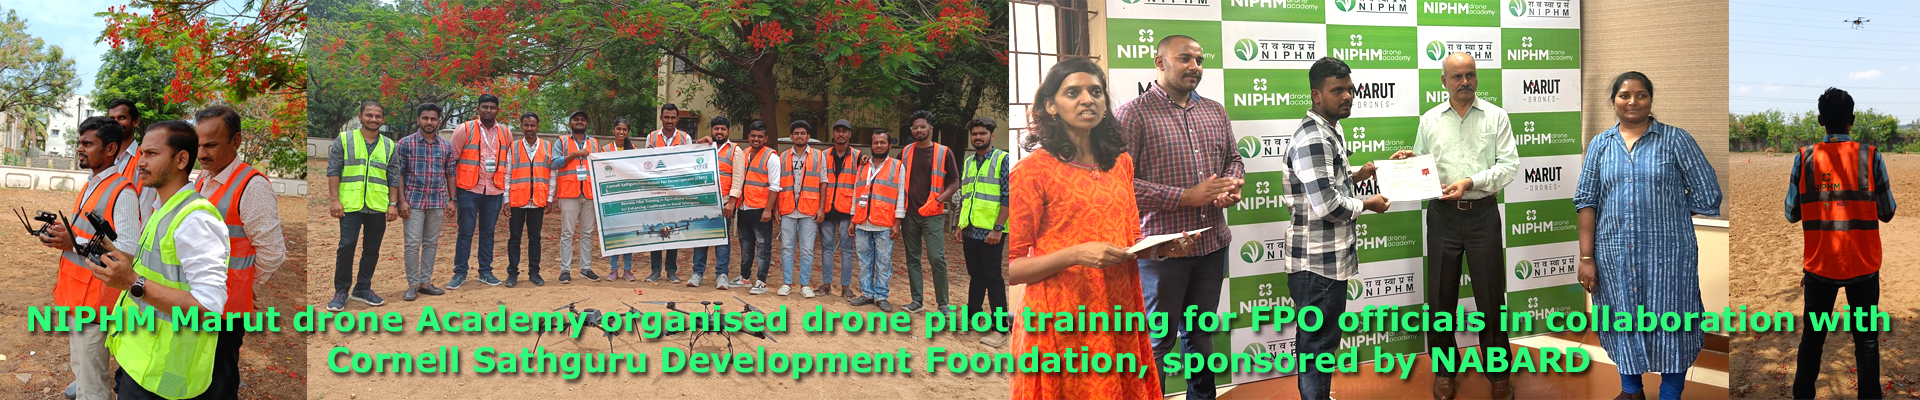 NIPHM Marut drone Academy organised drone pilot training for FPO officials in collaboration with Cornell Sathguru Development Foondation, sponsored by NABARD